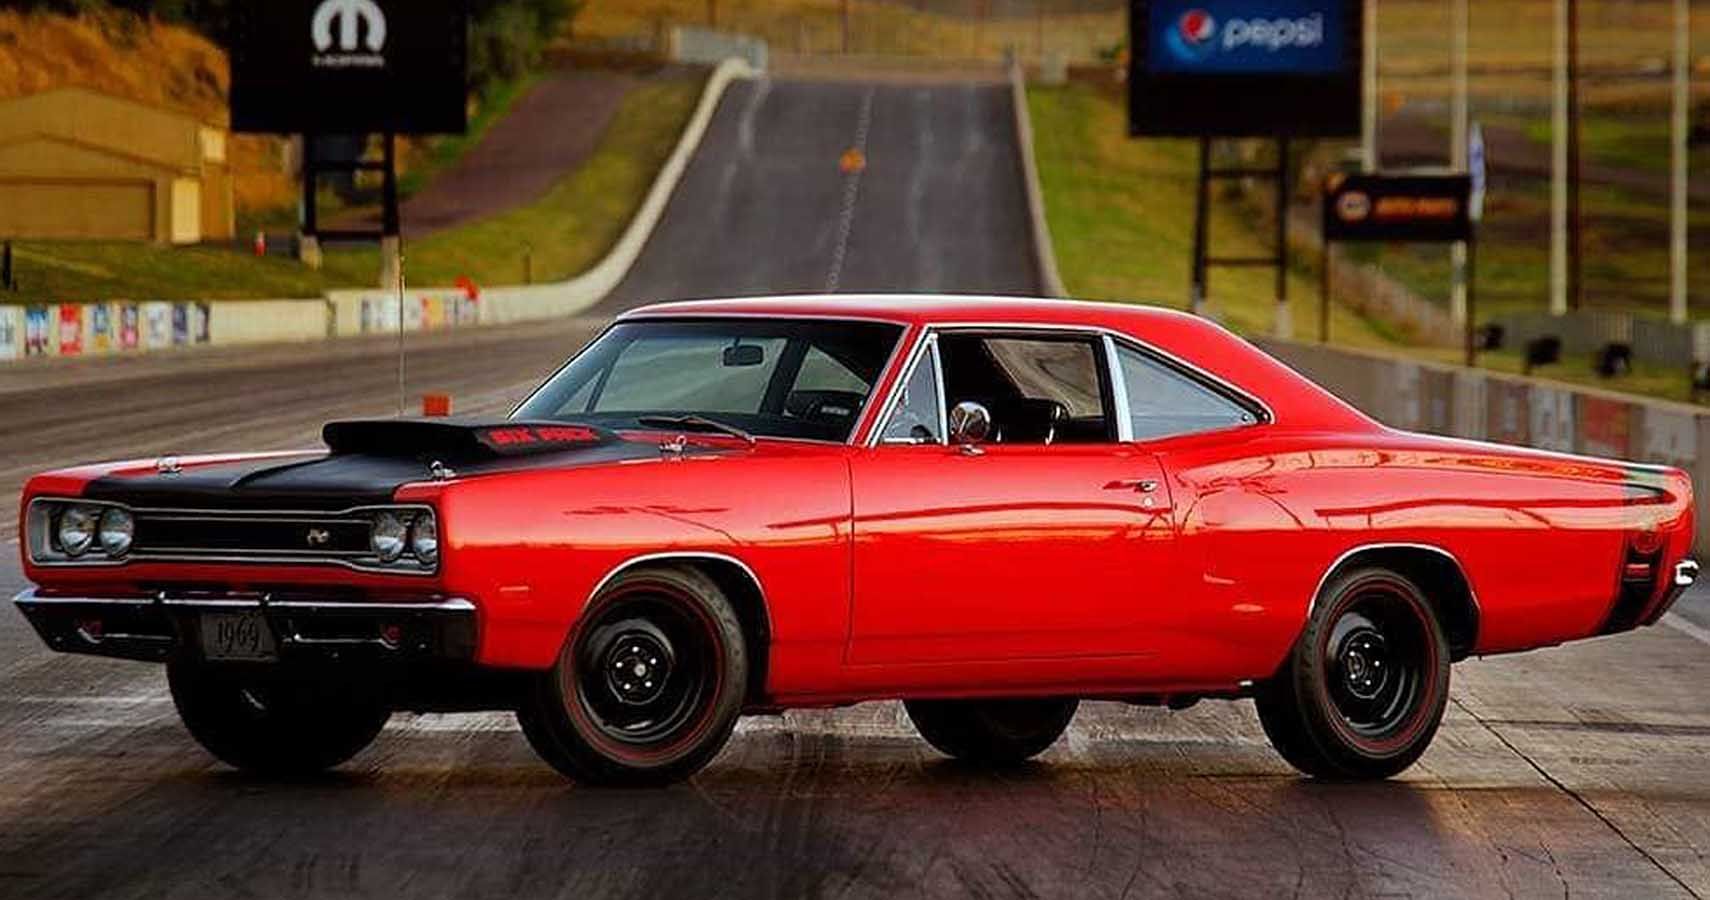 1969 Dodge Super Bee A12 parked on a drag strip